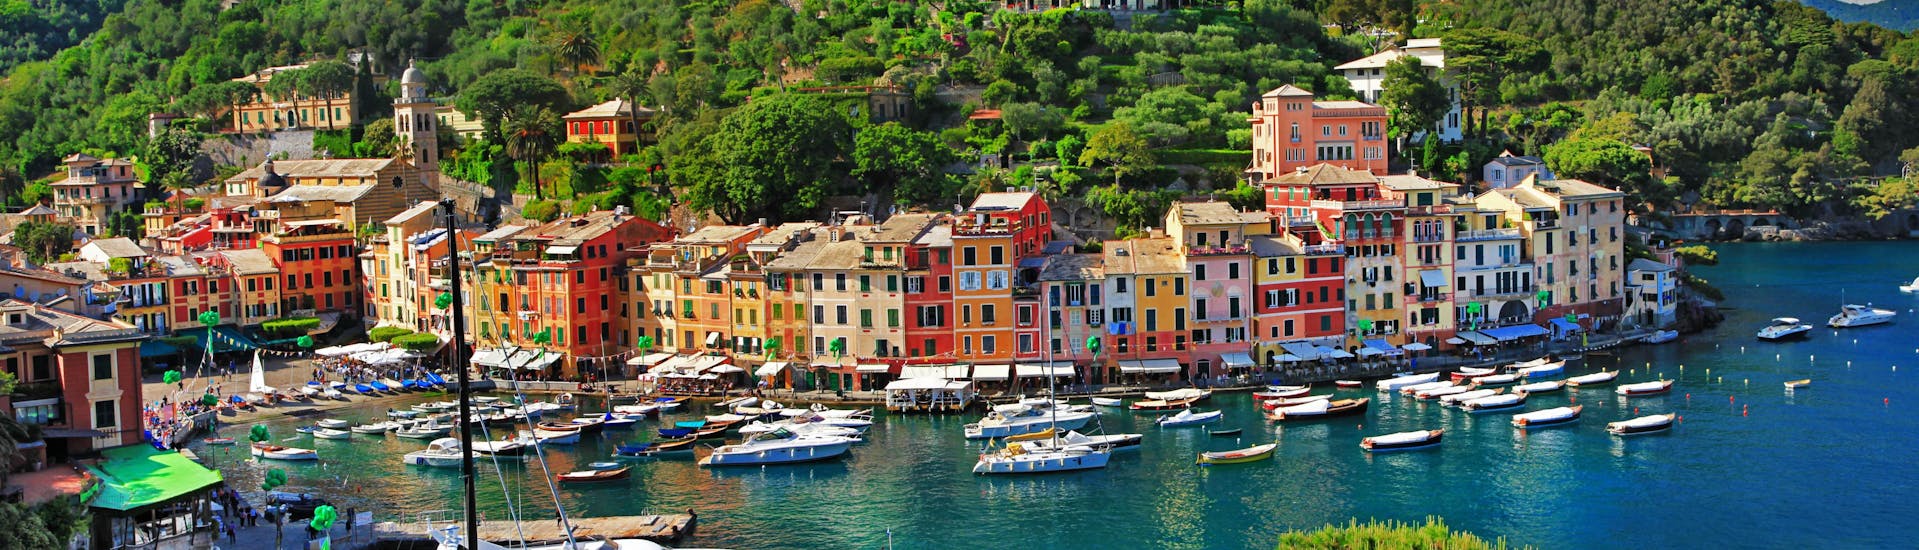 The picturesque and colourful harbour of Portofino, a beautiful vacation destination.